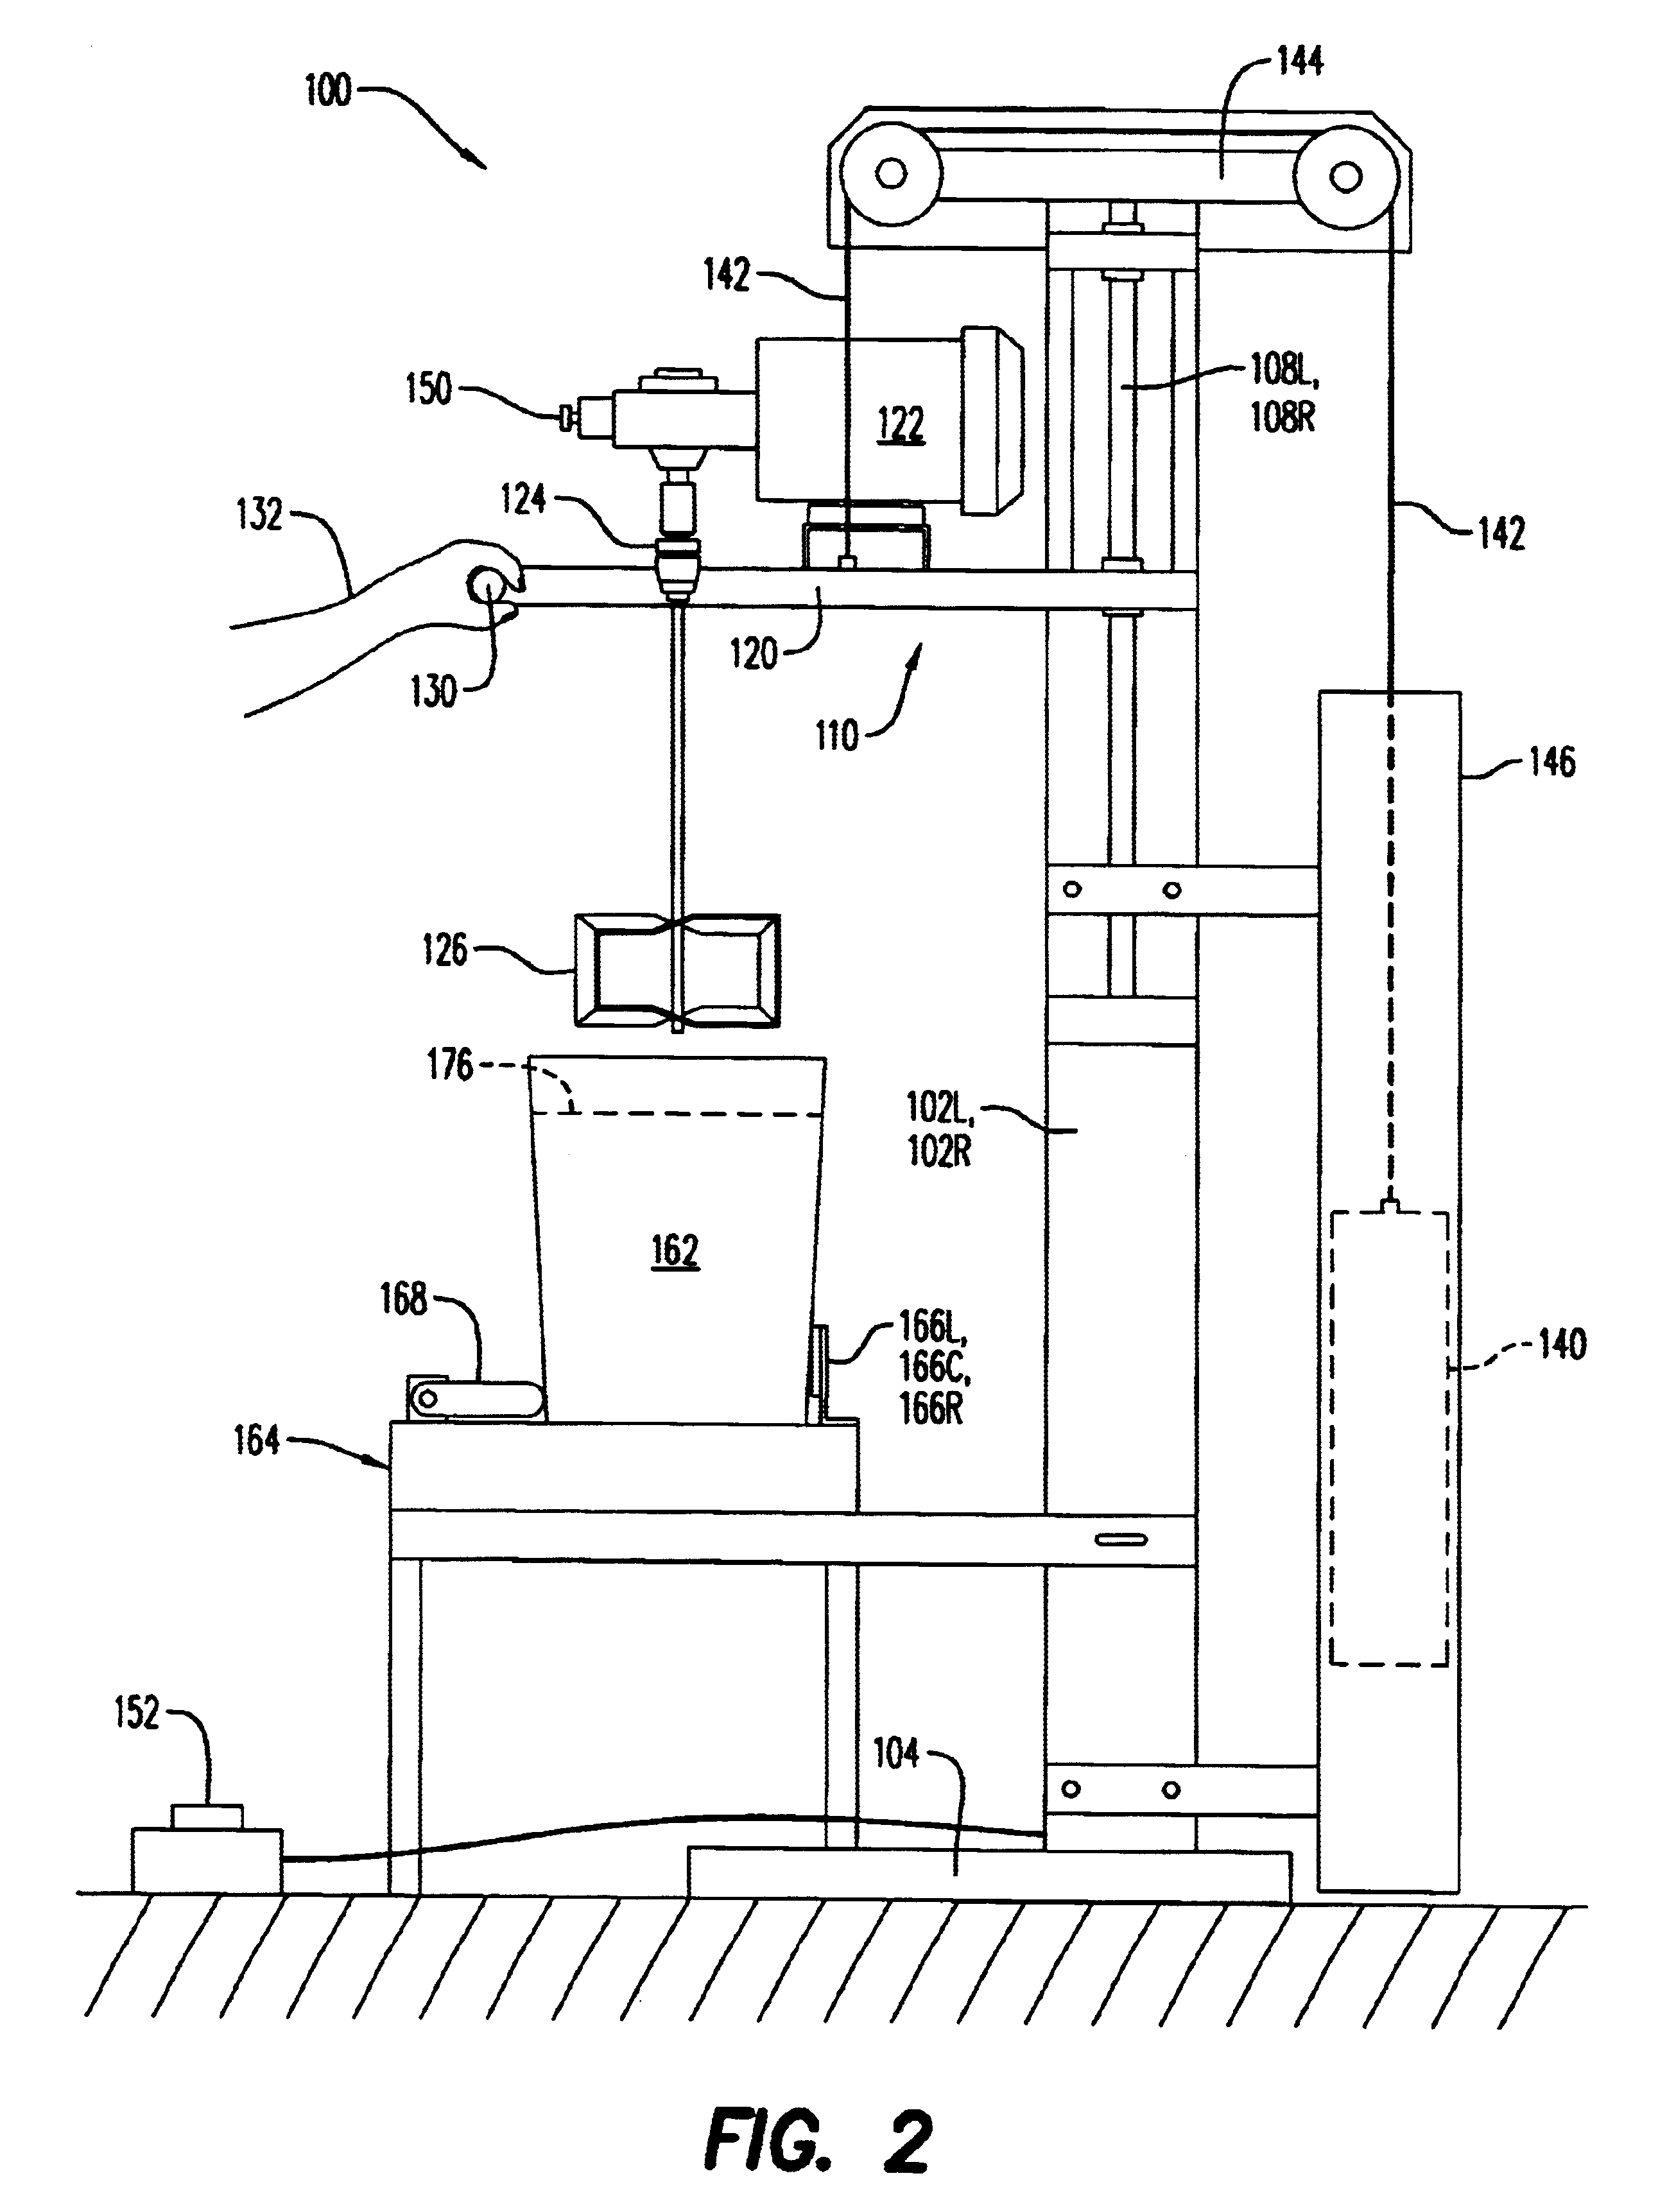 Stirring apparatus for large containers